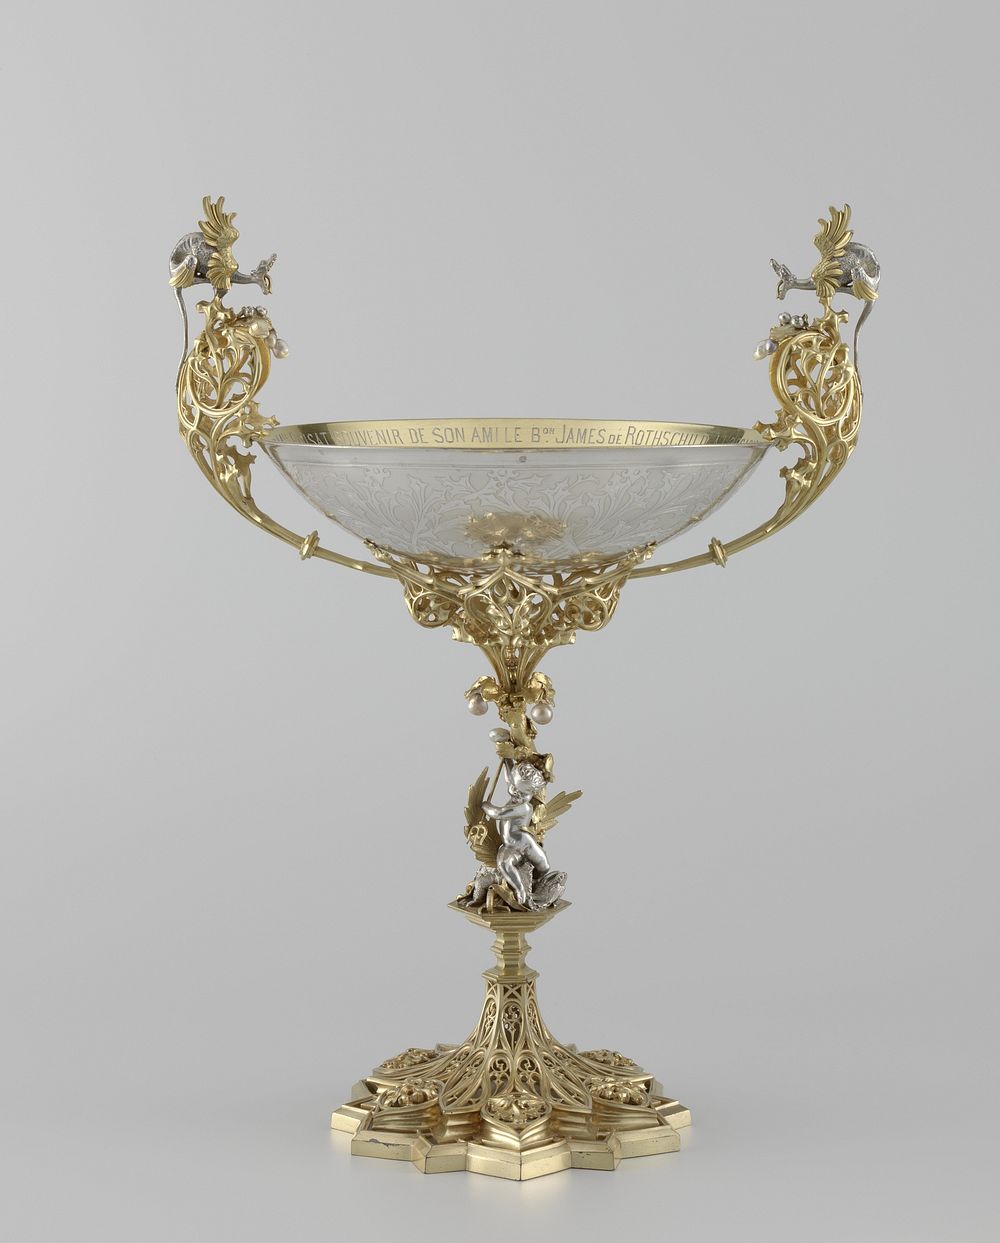 Coupe (c. 1849) by François Désiré Froment Meurice and Jules Wièse